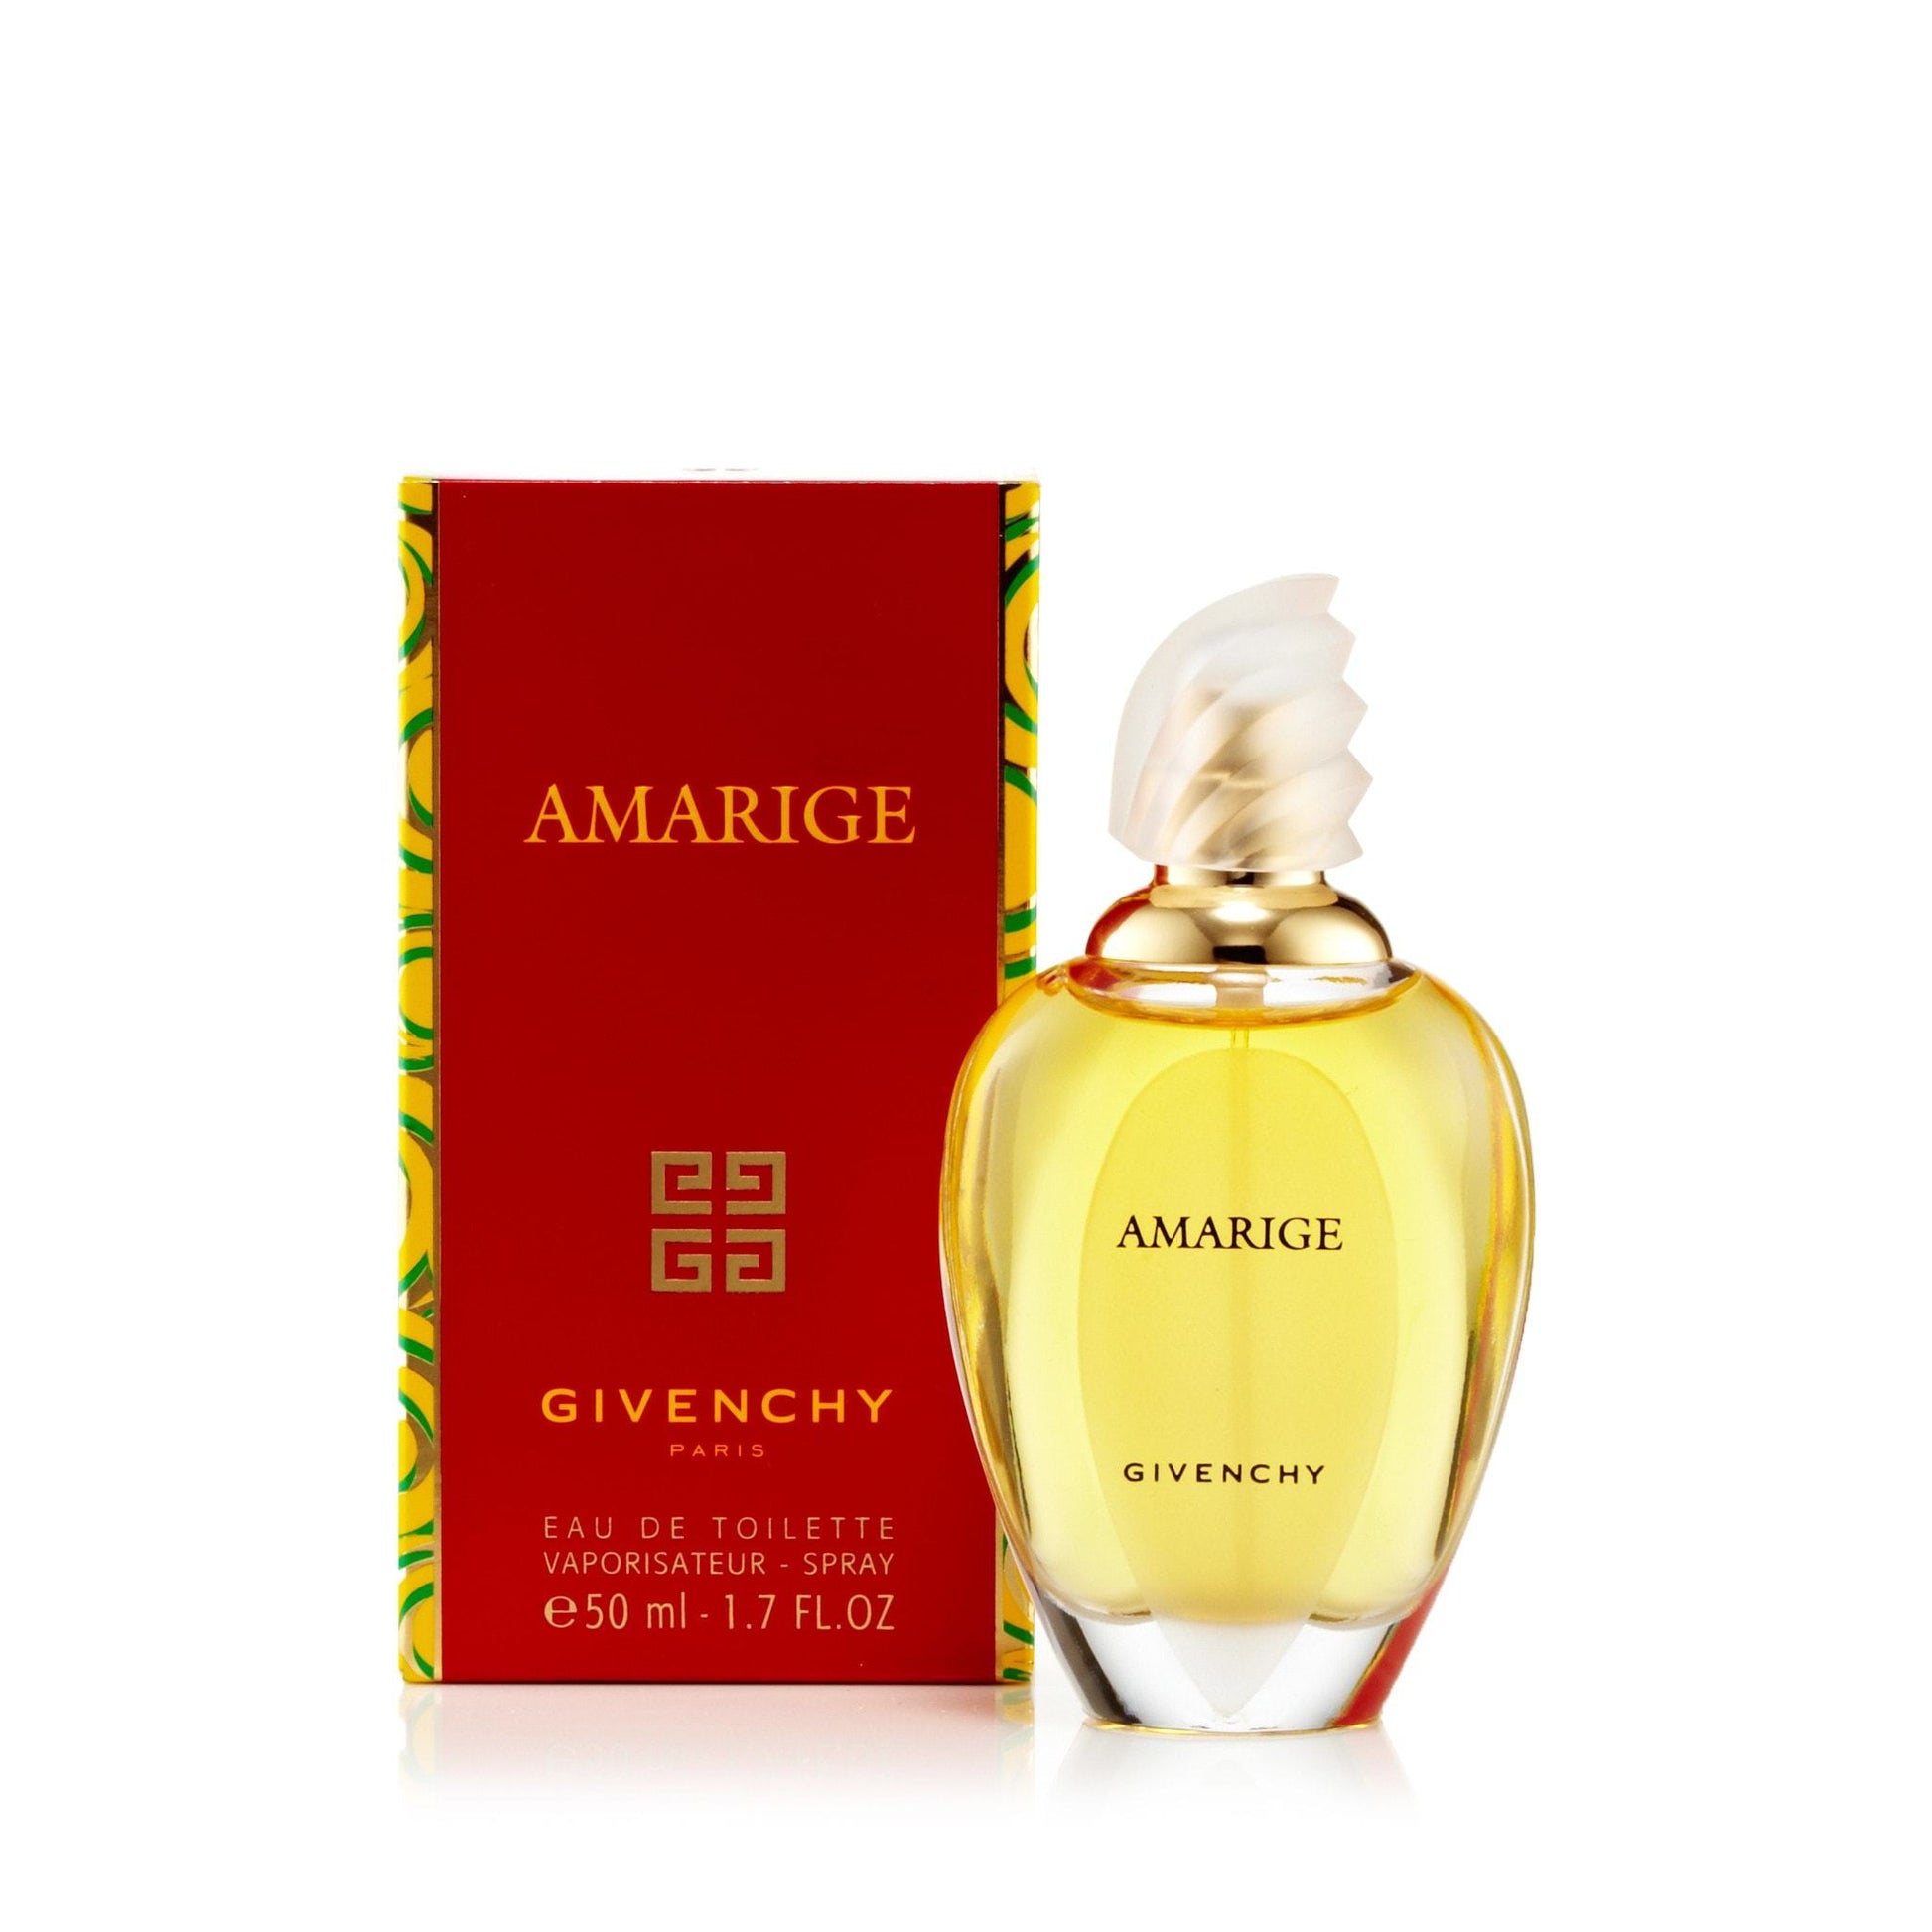 Parfums Givenchy Bag Used in Promotional Item for Amarige 